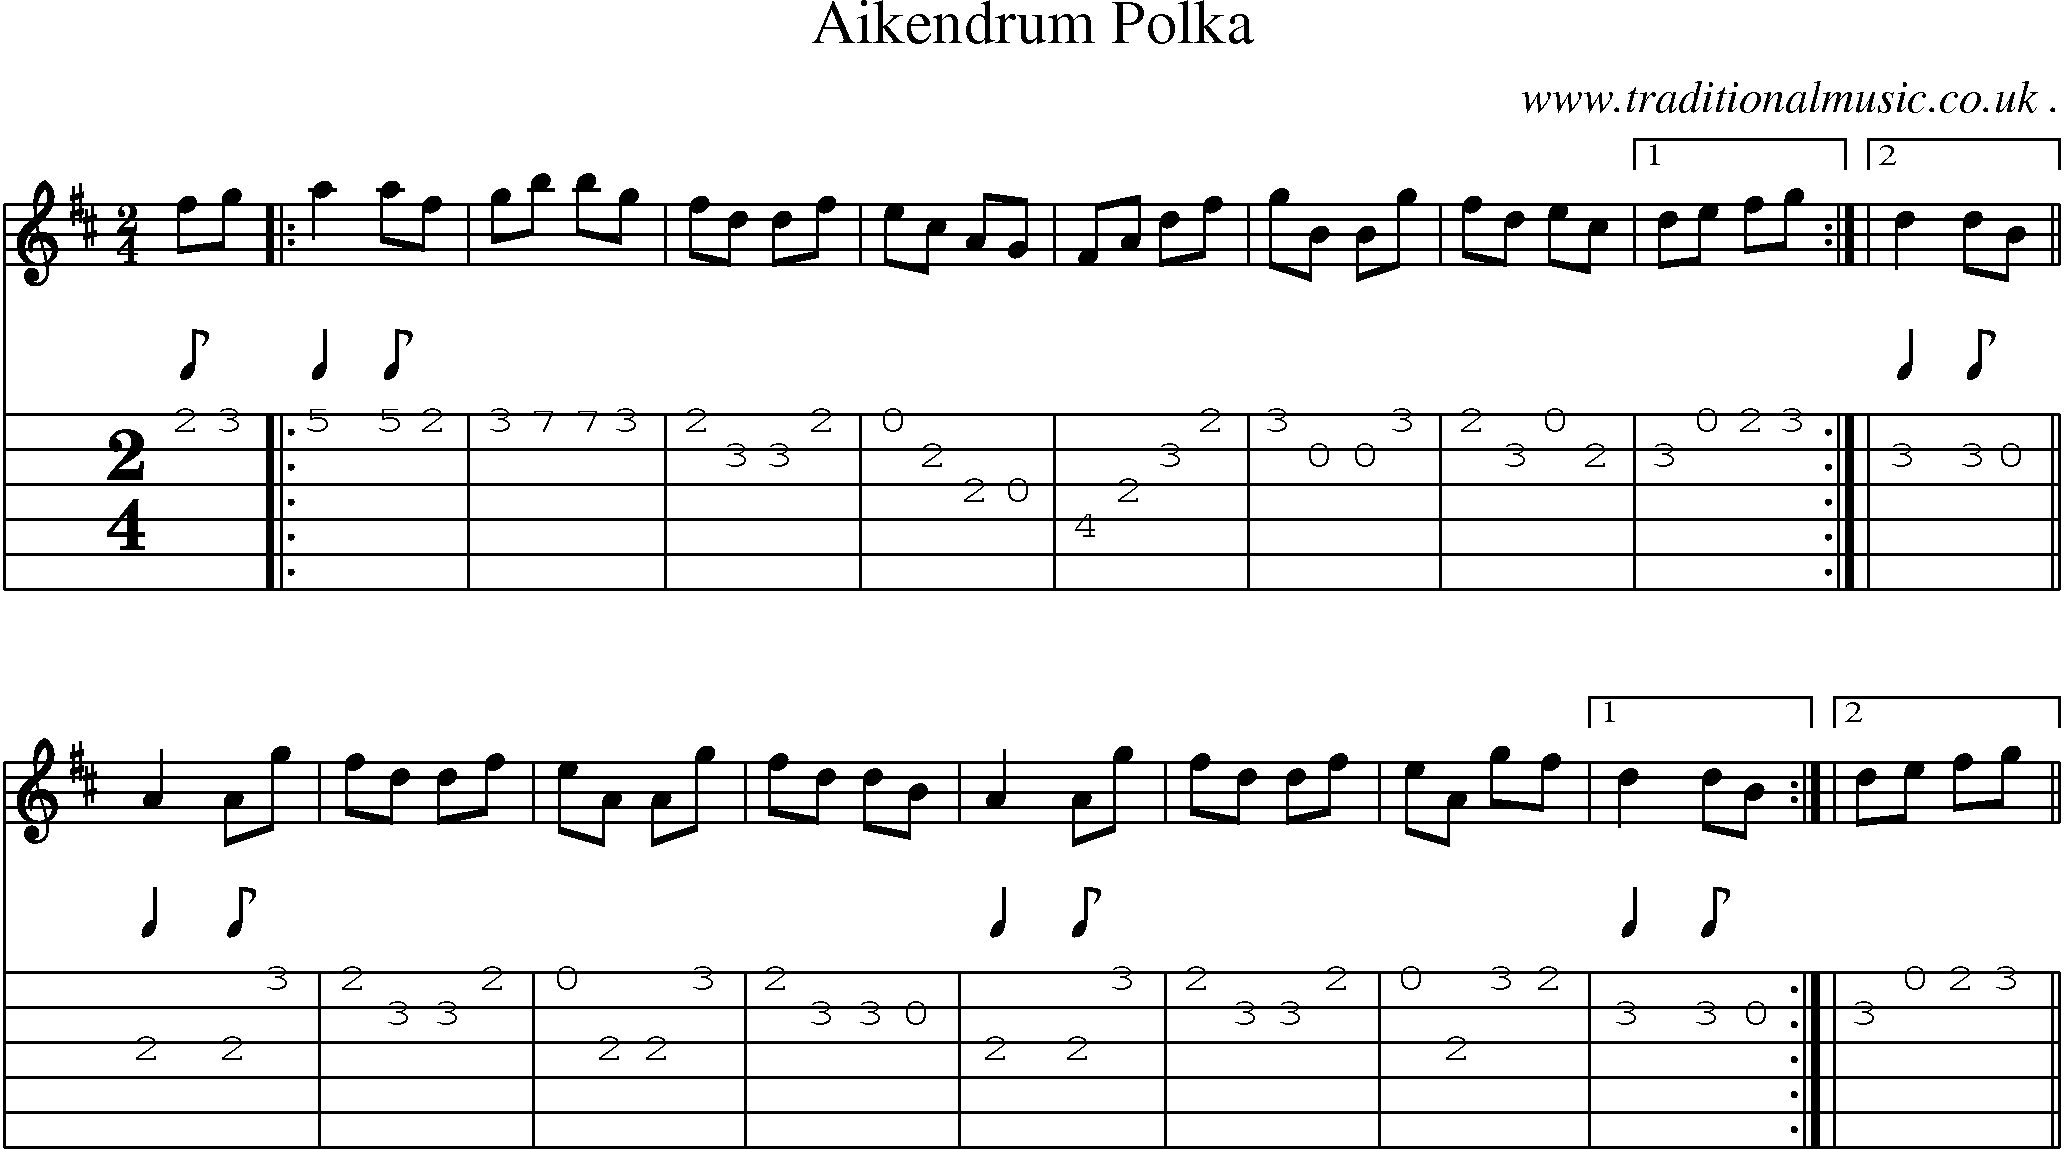 Sheet-Music and Guitar Tabs for Aikendrum Polka